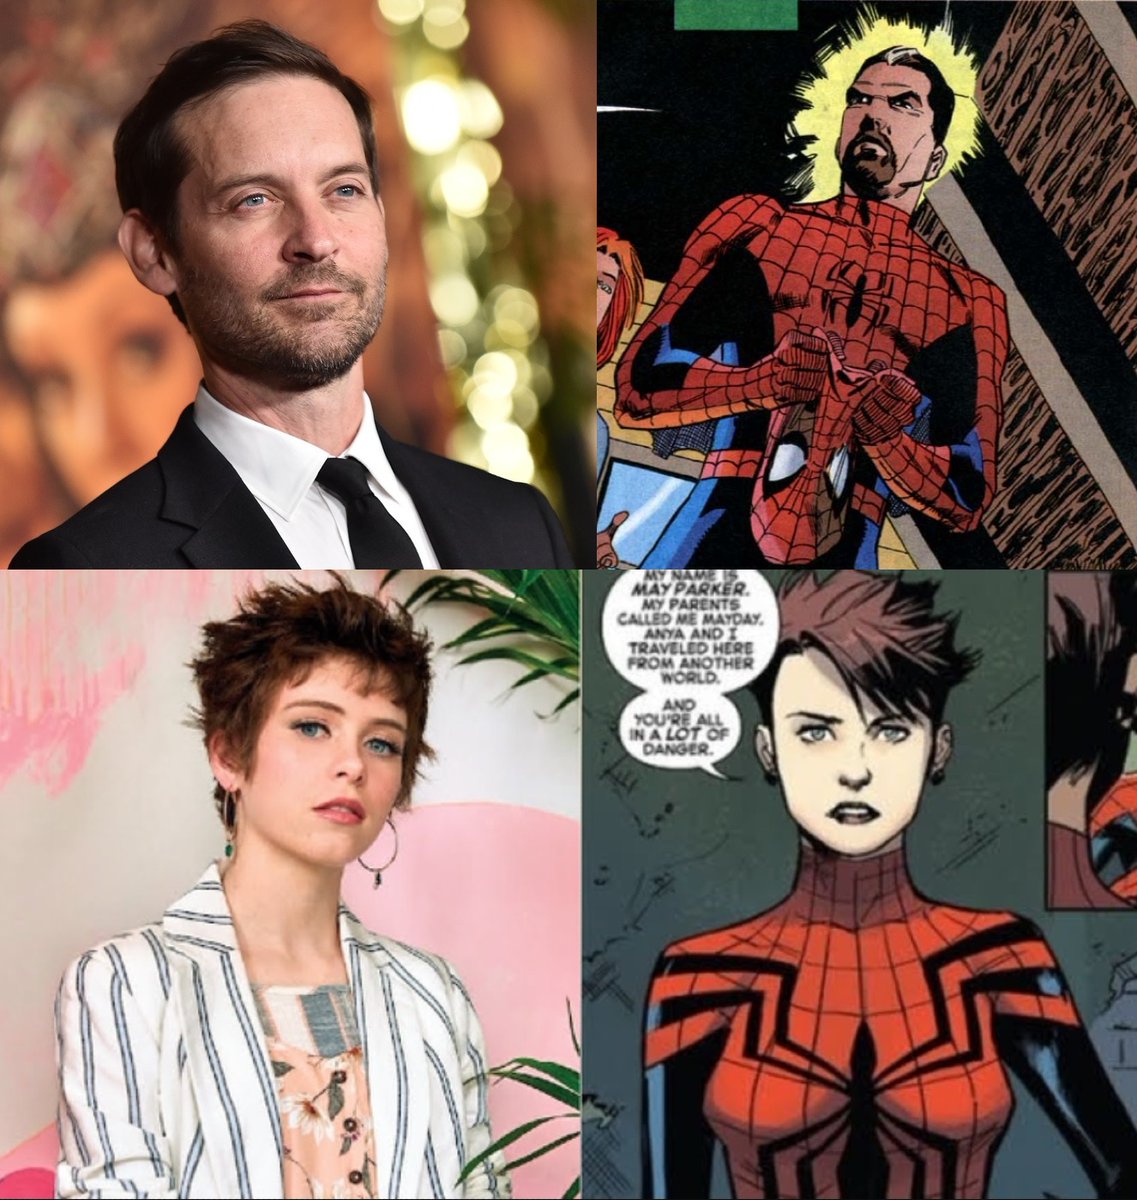 @GraySpidey7 @Sony @SonyPictures @SonyPicsHomeEnt @SonyPics_Life @SpiderMan @SpiderManMovie Please @SonyPictures make Sam Raimi's Spider-Man 4 movie, bring Tobey Maguire back as Spider-Man, And Sophia Lillis as Mayday Parker (Spider-Girl) please. @Kevfeige @Sony  

#MakeRaimiSpiderMan4 🙏